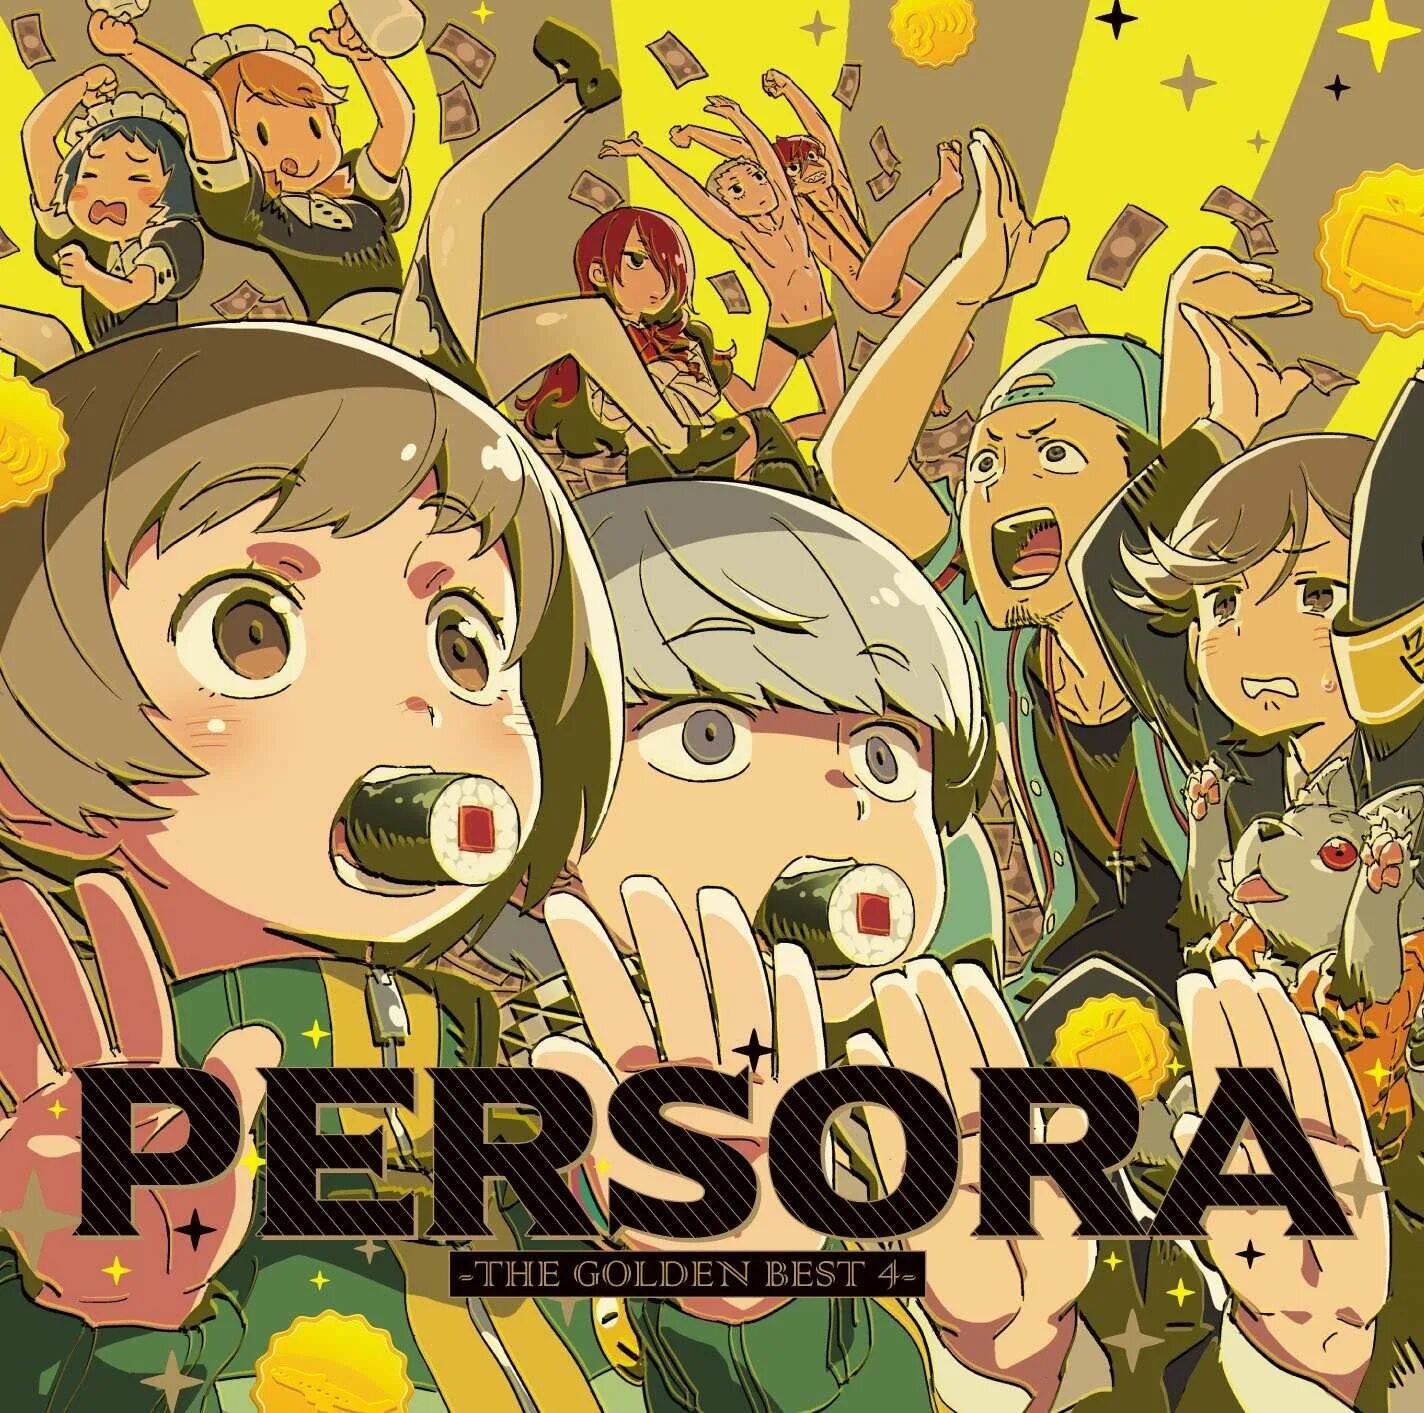 Golden well. Persona 4 Golden Cover. Persona OST Cover. Персона 4 обложка альбома. Голден Бест.